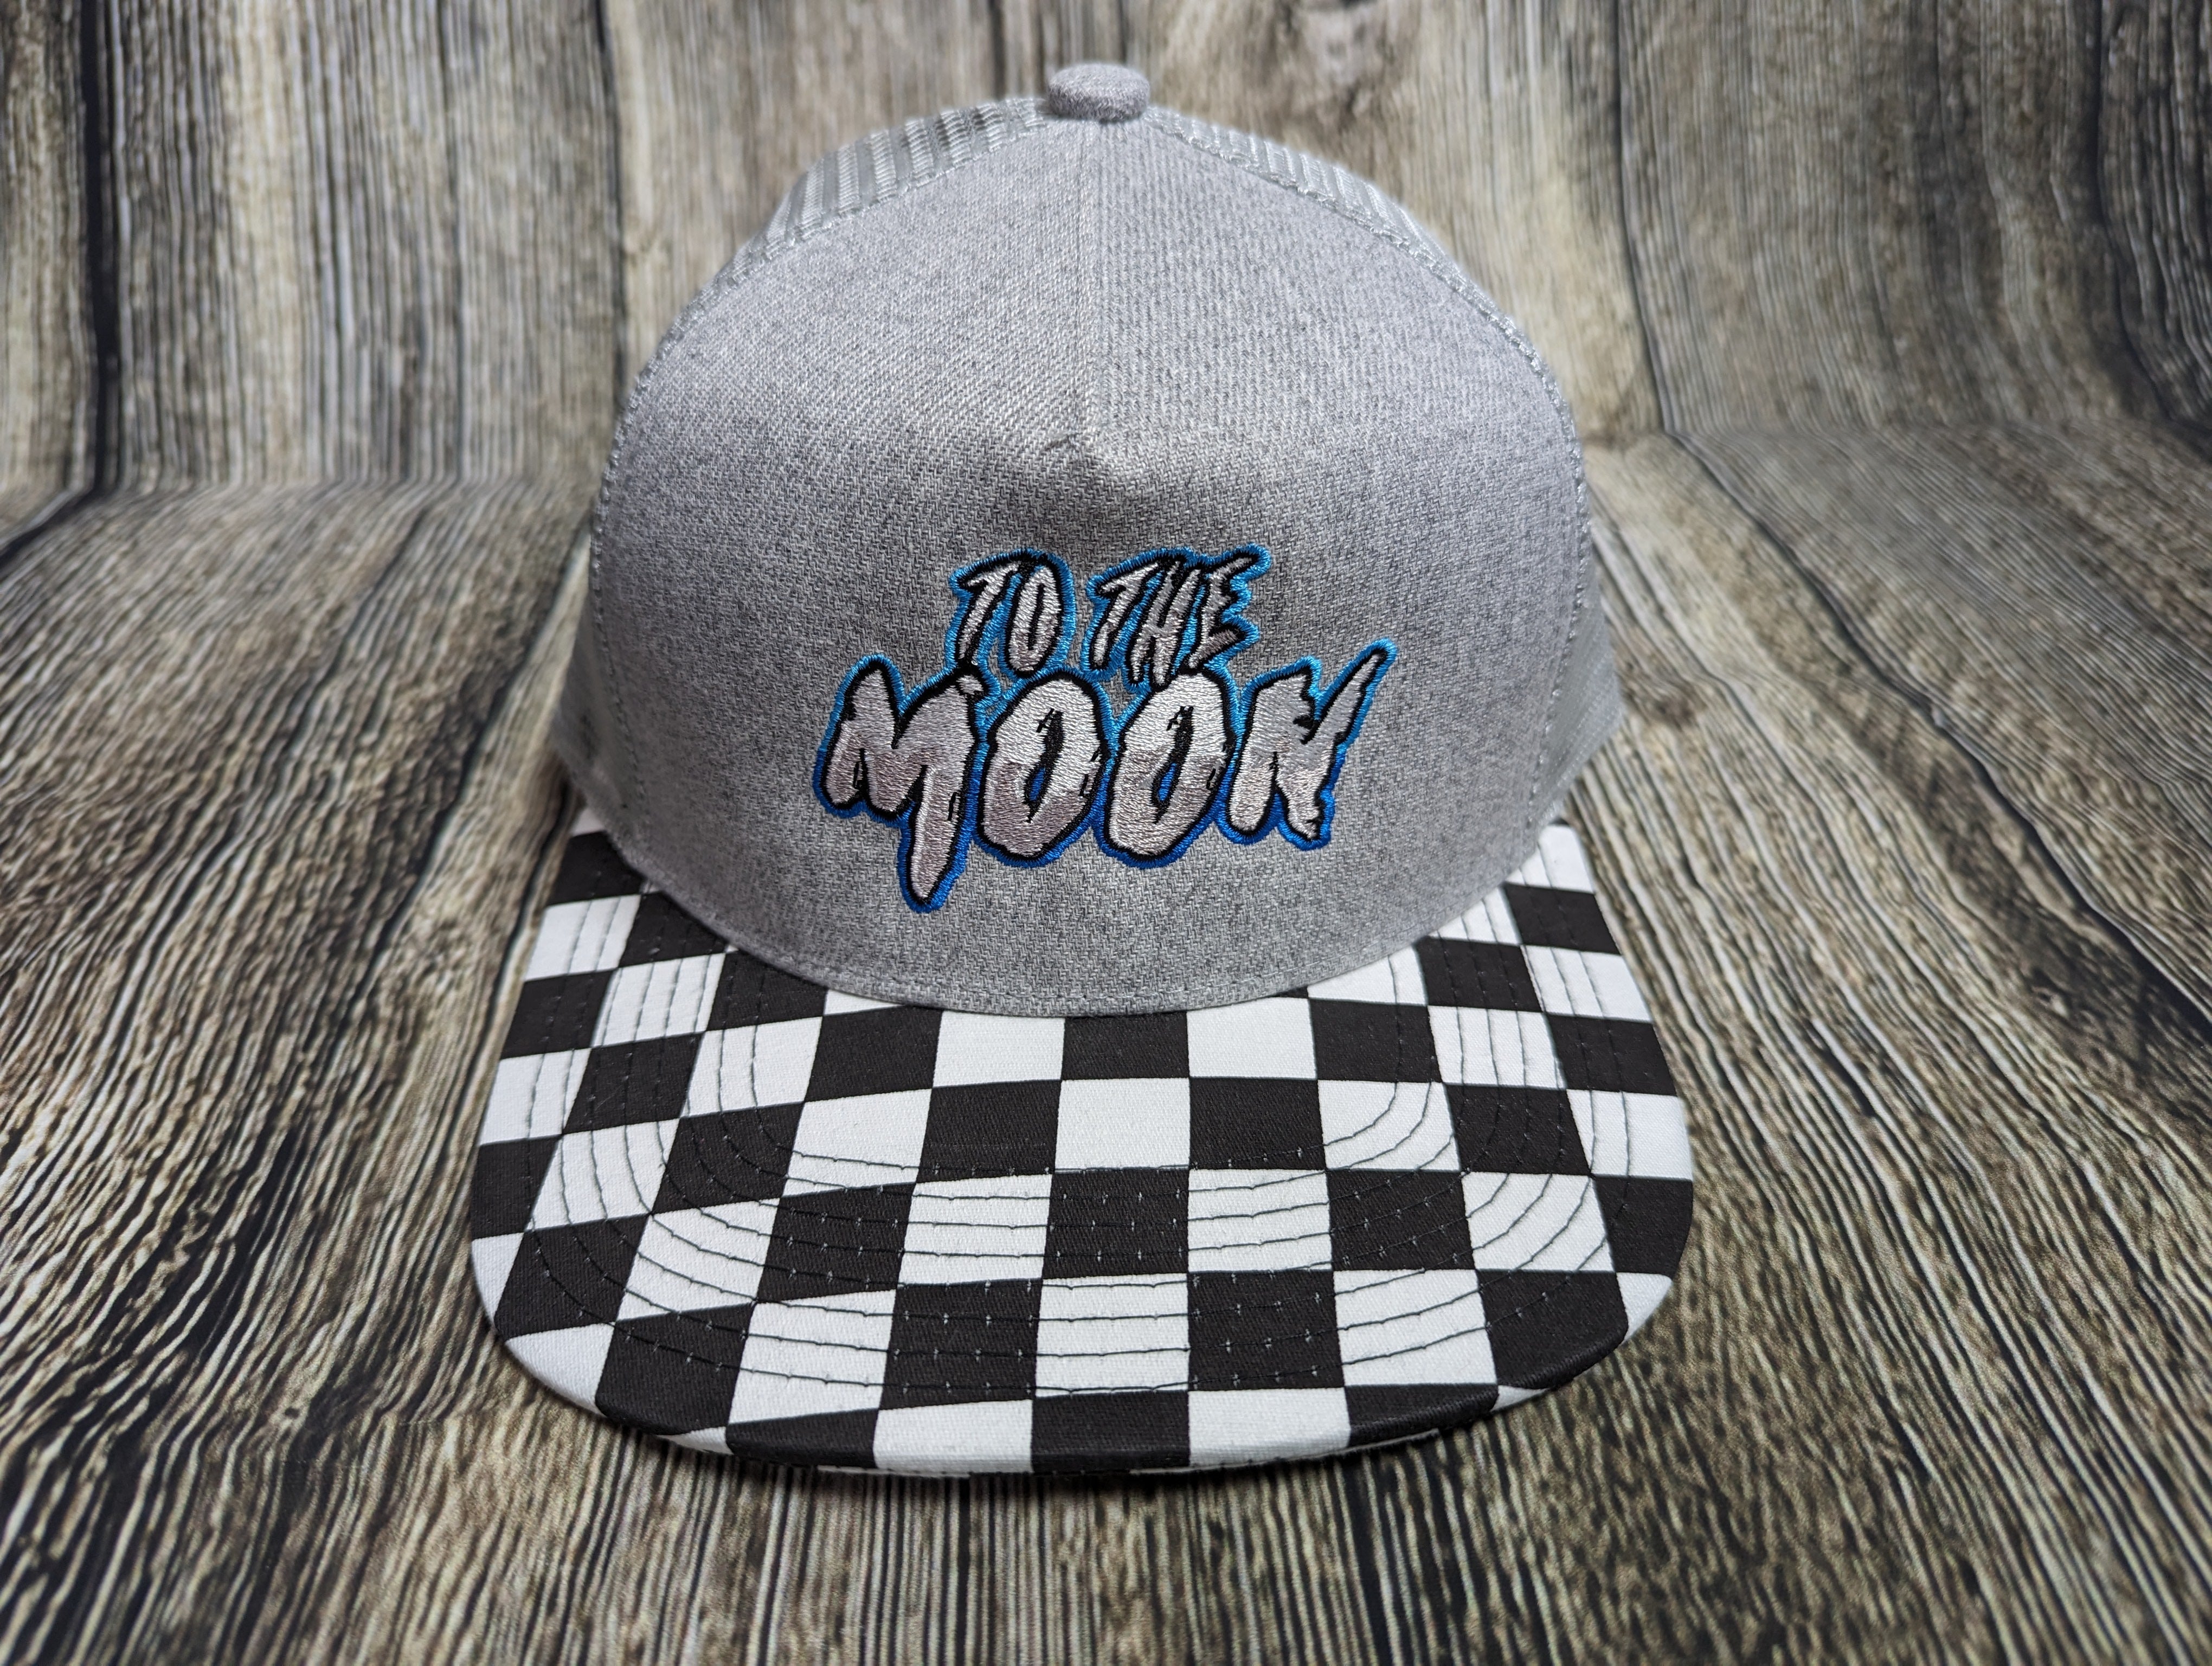 To The Moon - Snapback Mesh Hat